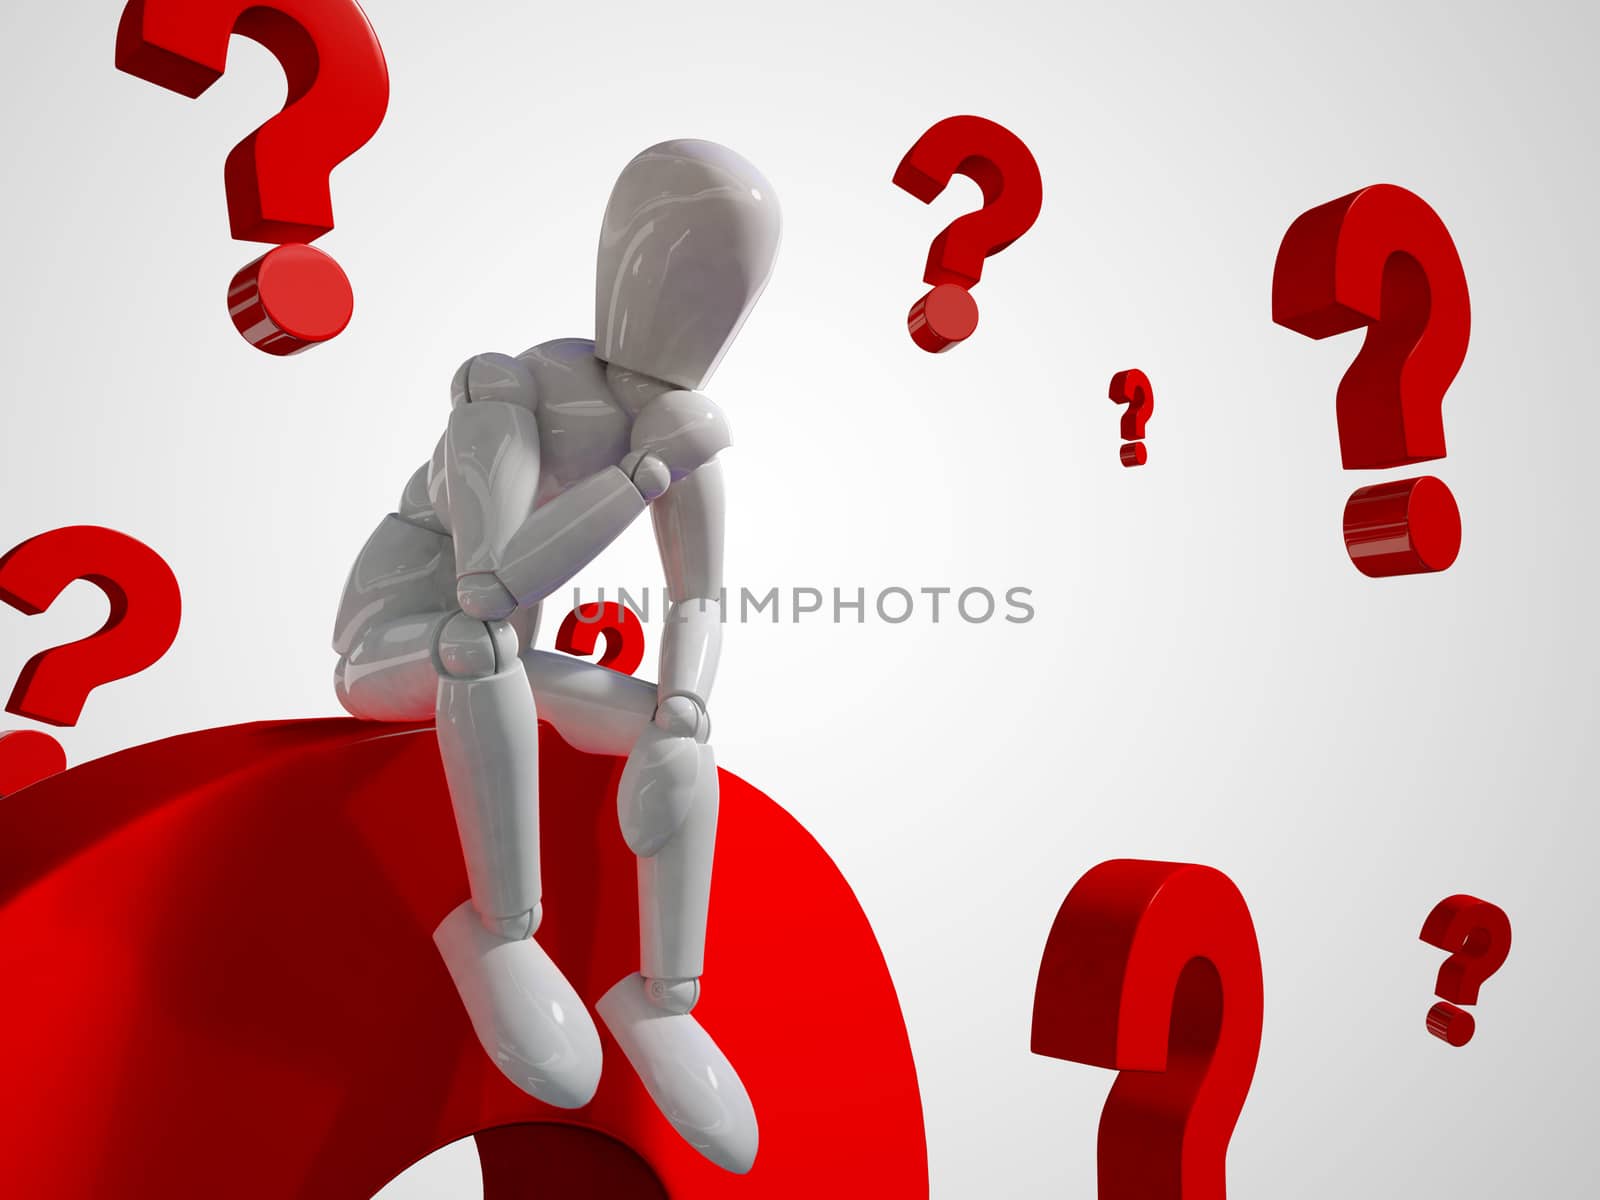 A puppet is thinking in a pile of question mark